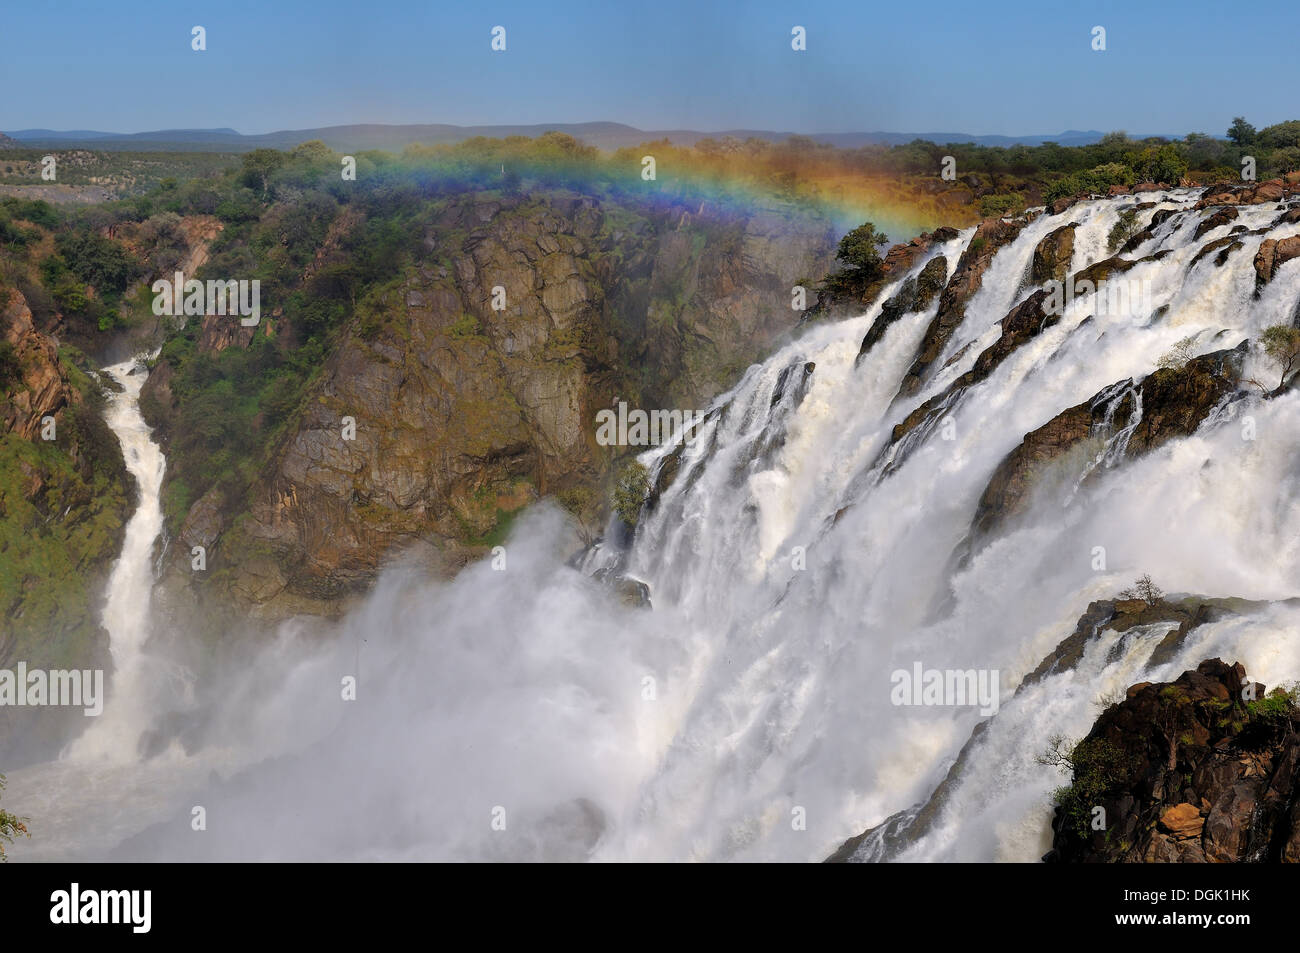 Rainbow over the Ruacana waterfalls on the boder between Angola and Namibia Stock Photo